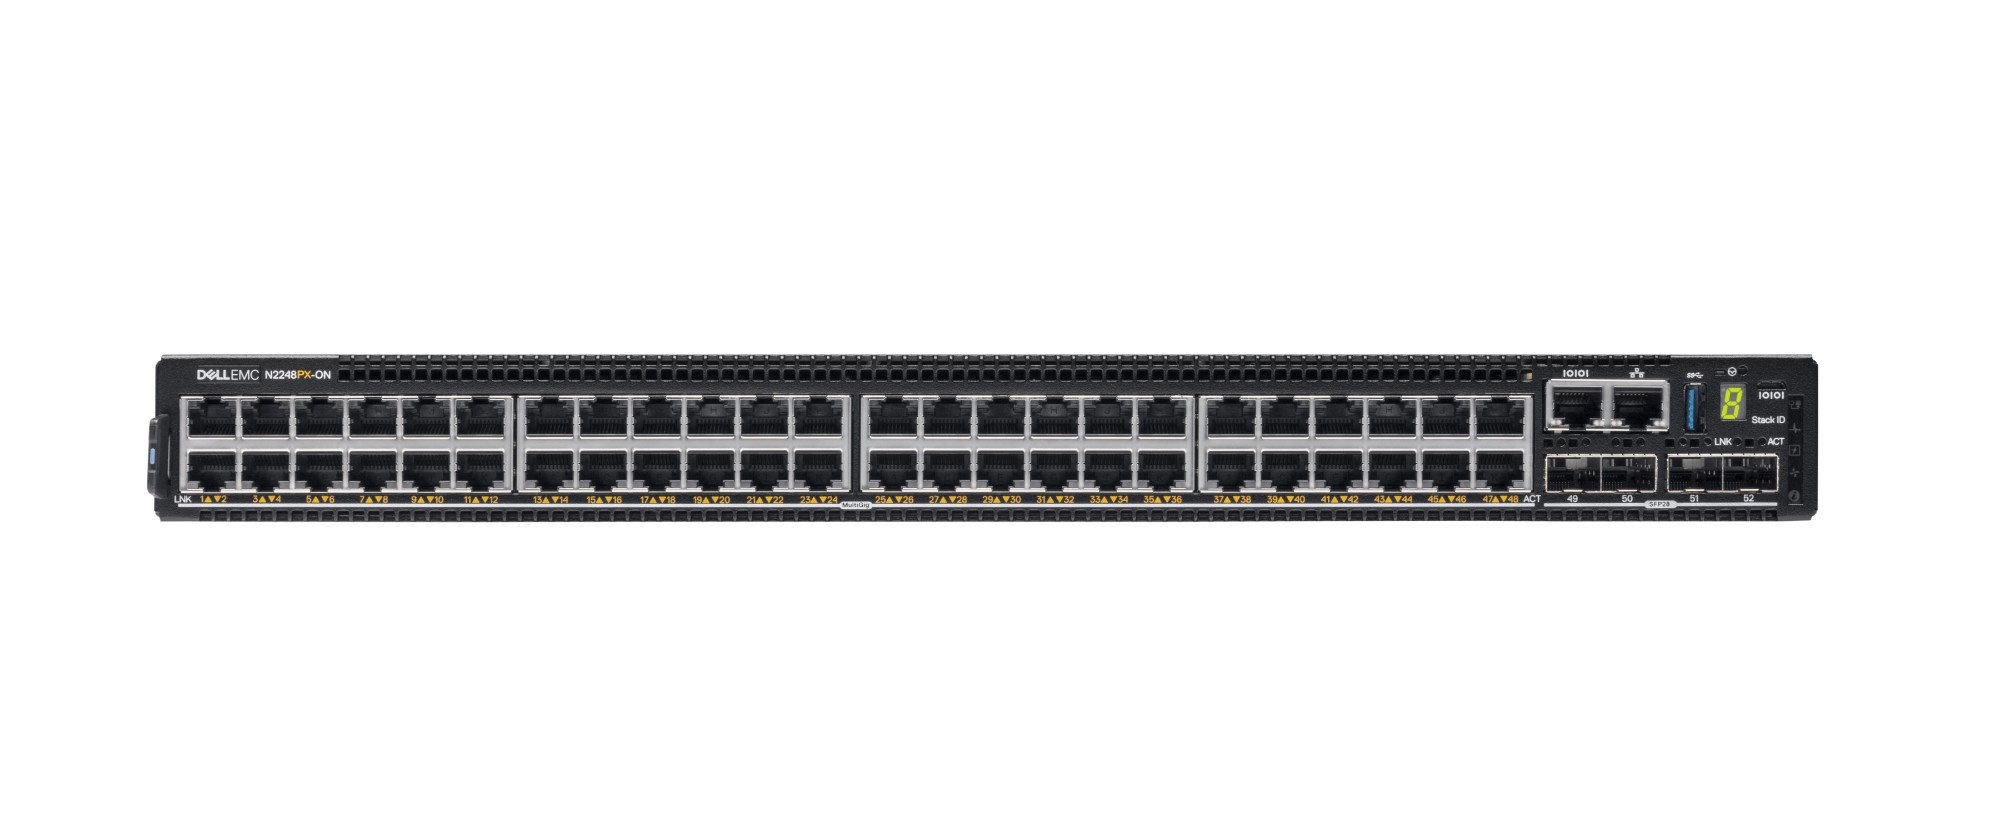 210-ASPX DELL PowerSwitch N2248PX-ON - Switch - L3 - managed - 24 x 10/100/1000/2.5G (PoE+)